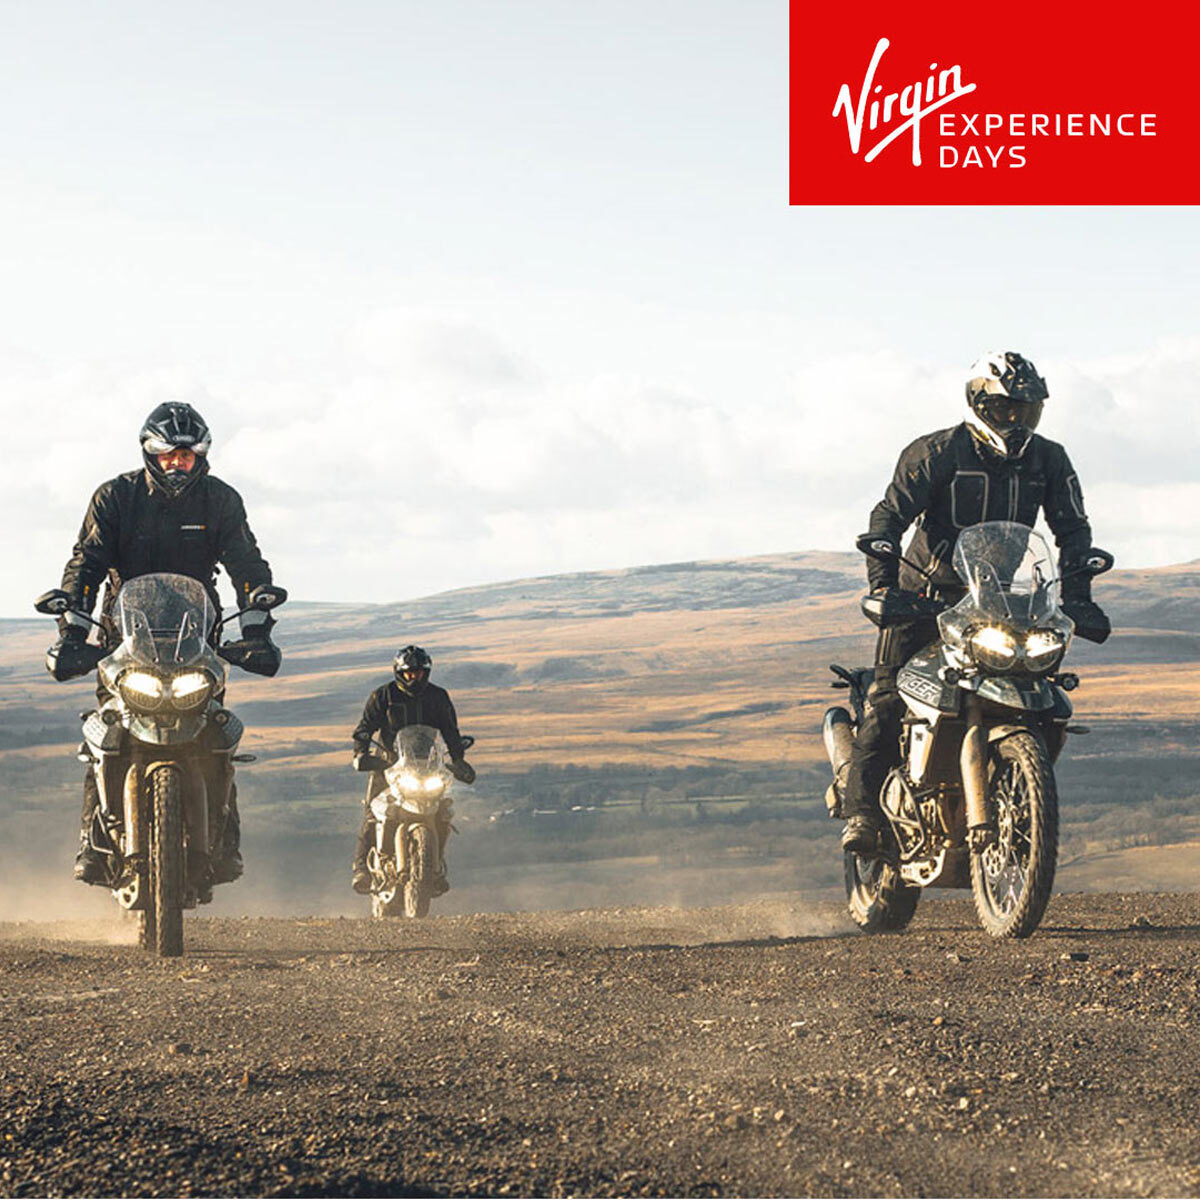 Buy Virgin Experience Full Day Scrambler Motorcycle Experience Image1 at Costco.co.uk